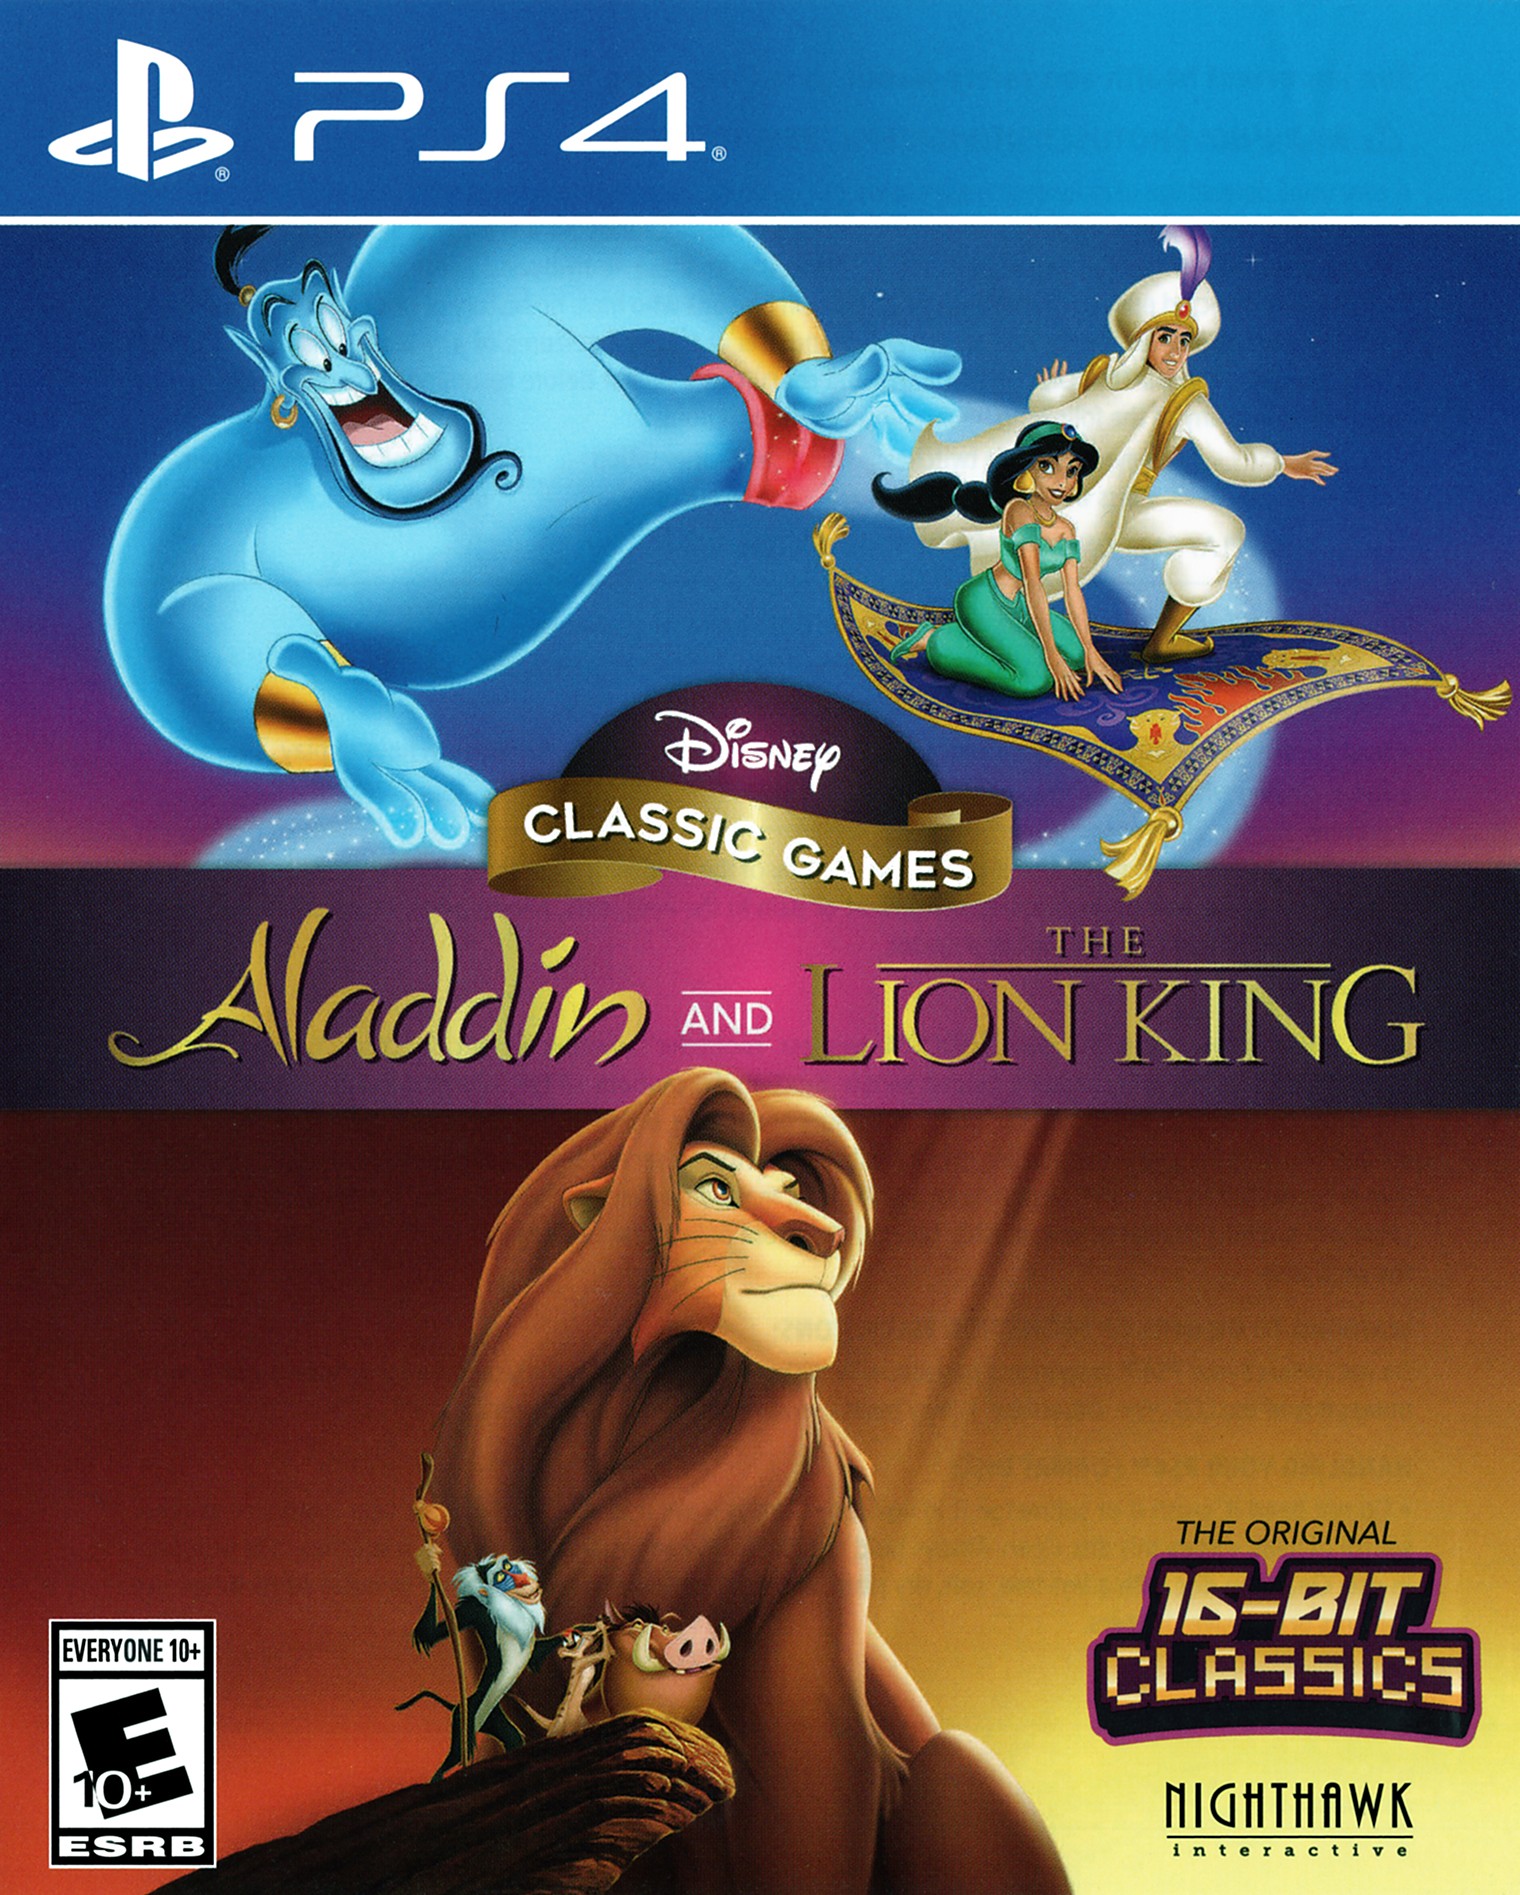 Disney Classic Games: 'Aladdin' and 'The Lion King'